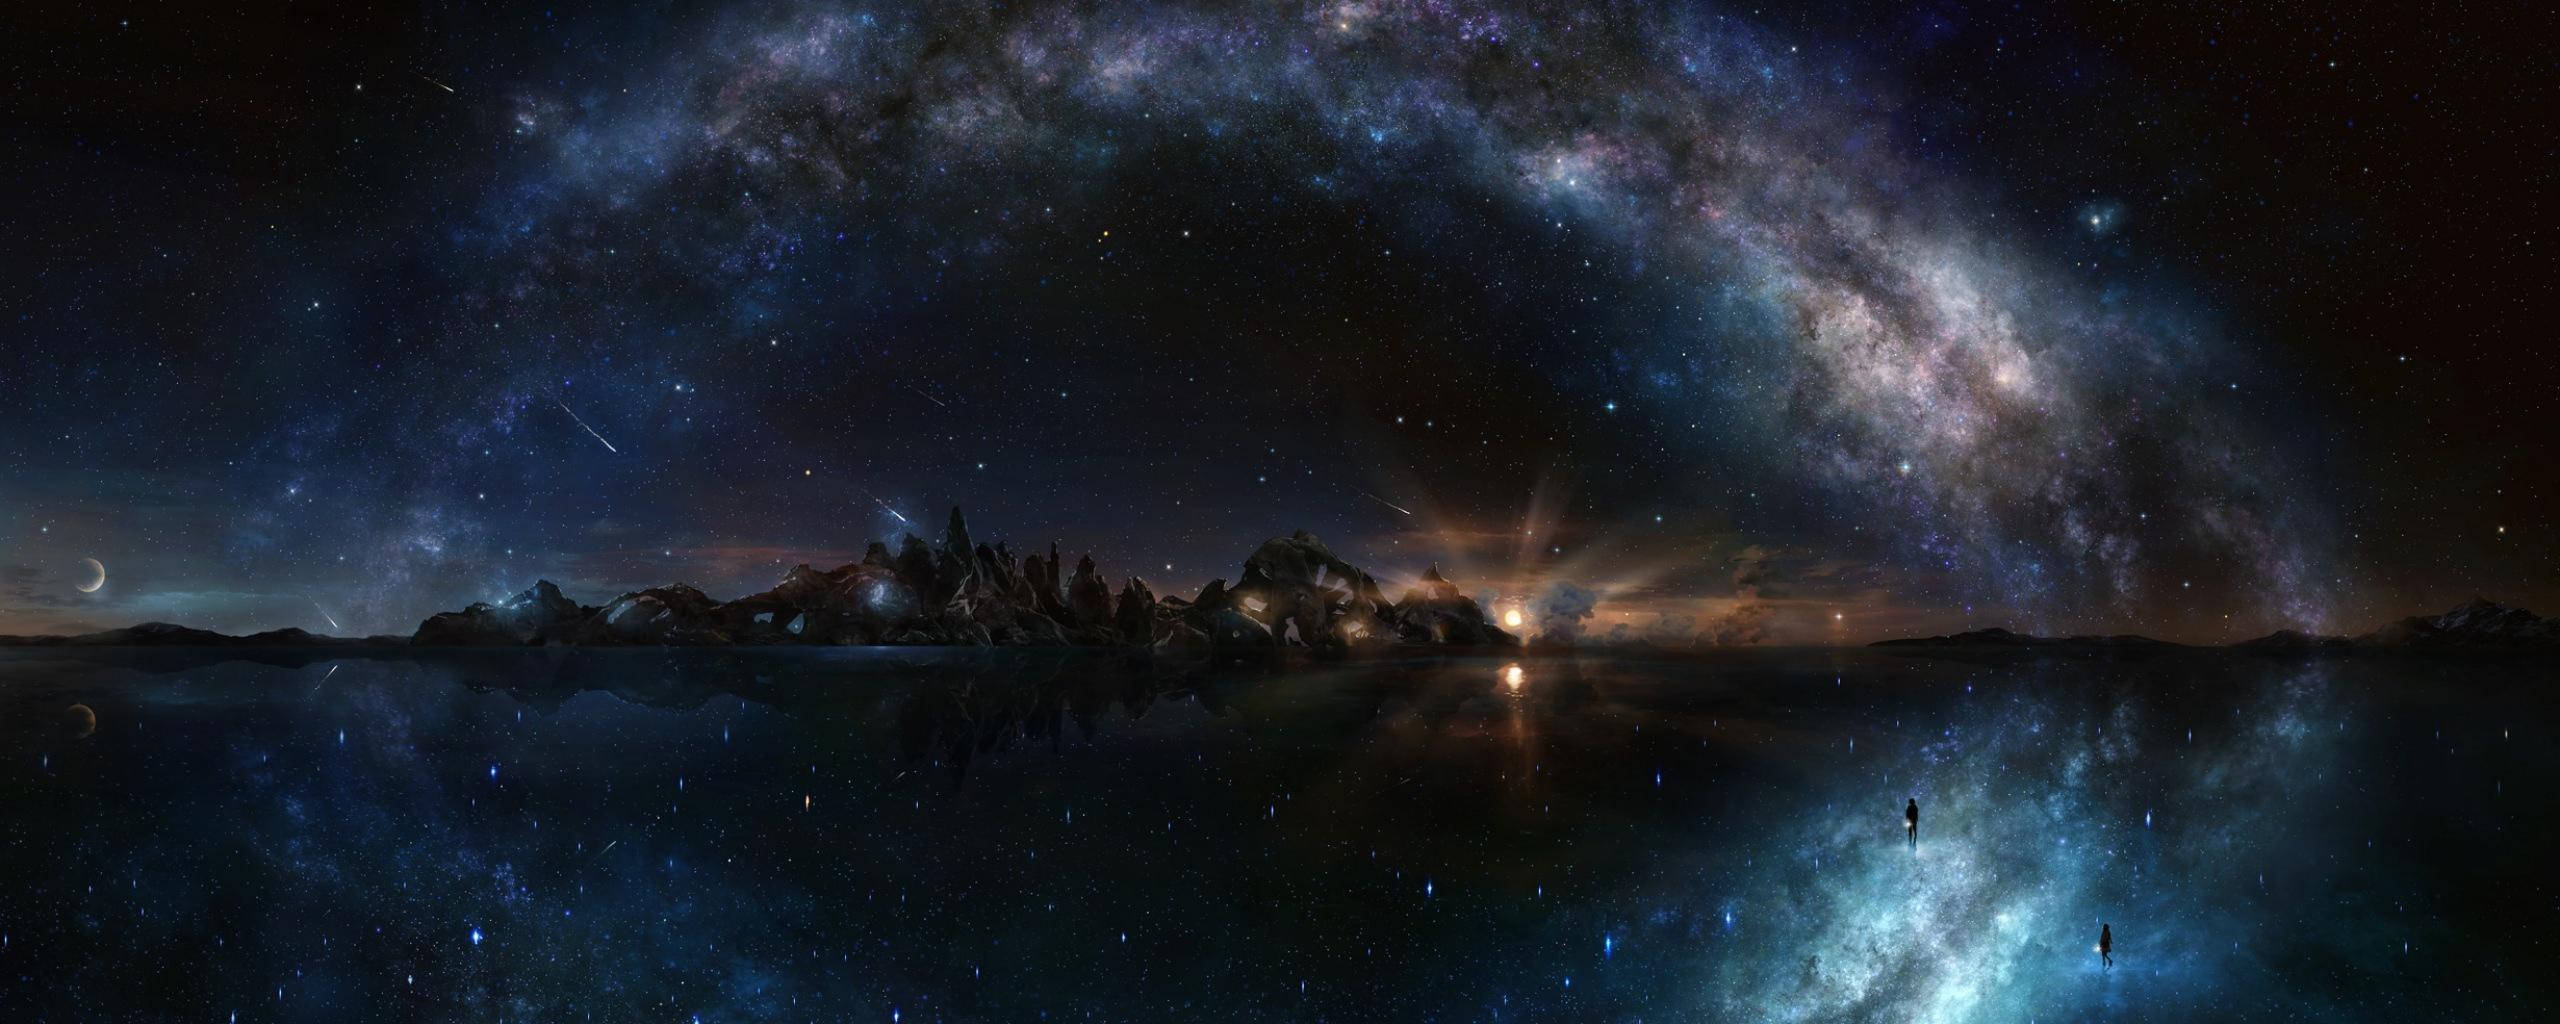 4K Astronomy Wallpapers - Top Free 4K Astronomy Backgrounds